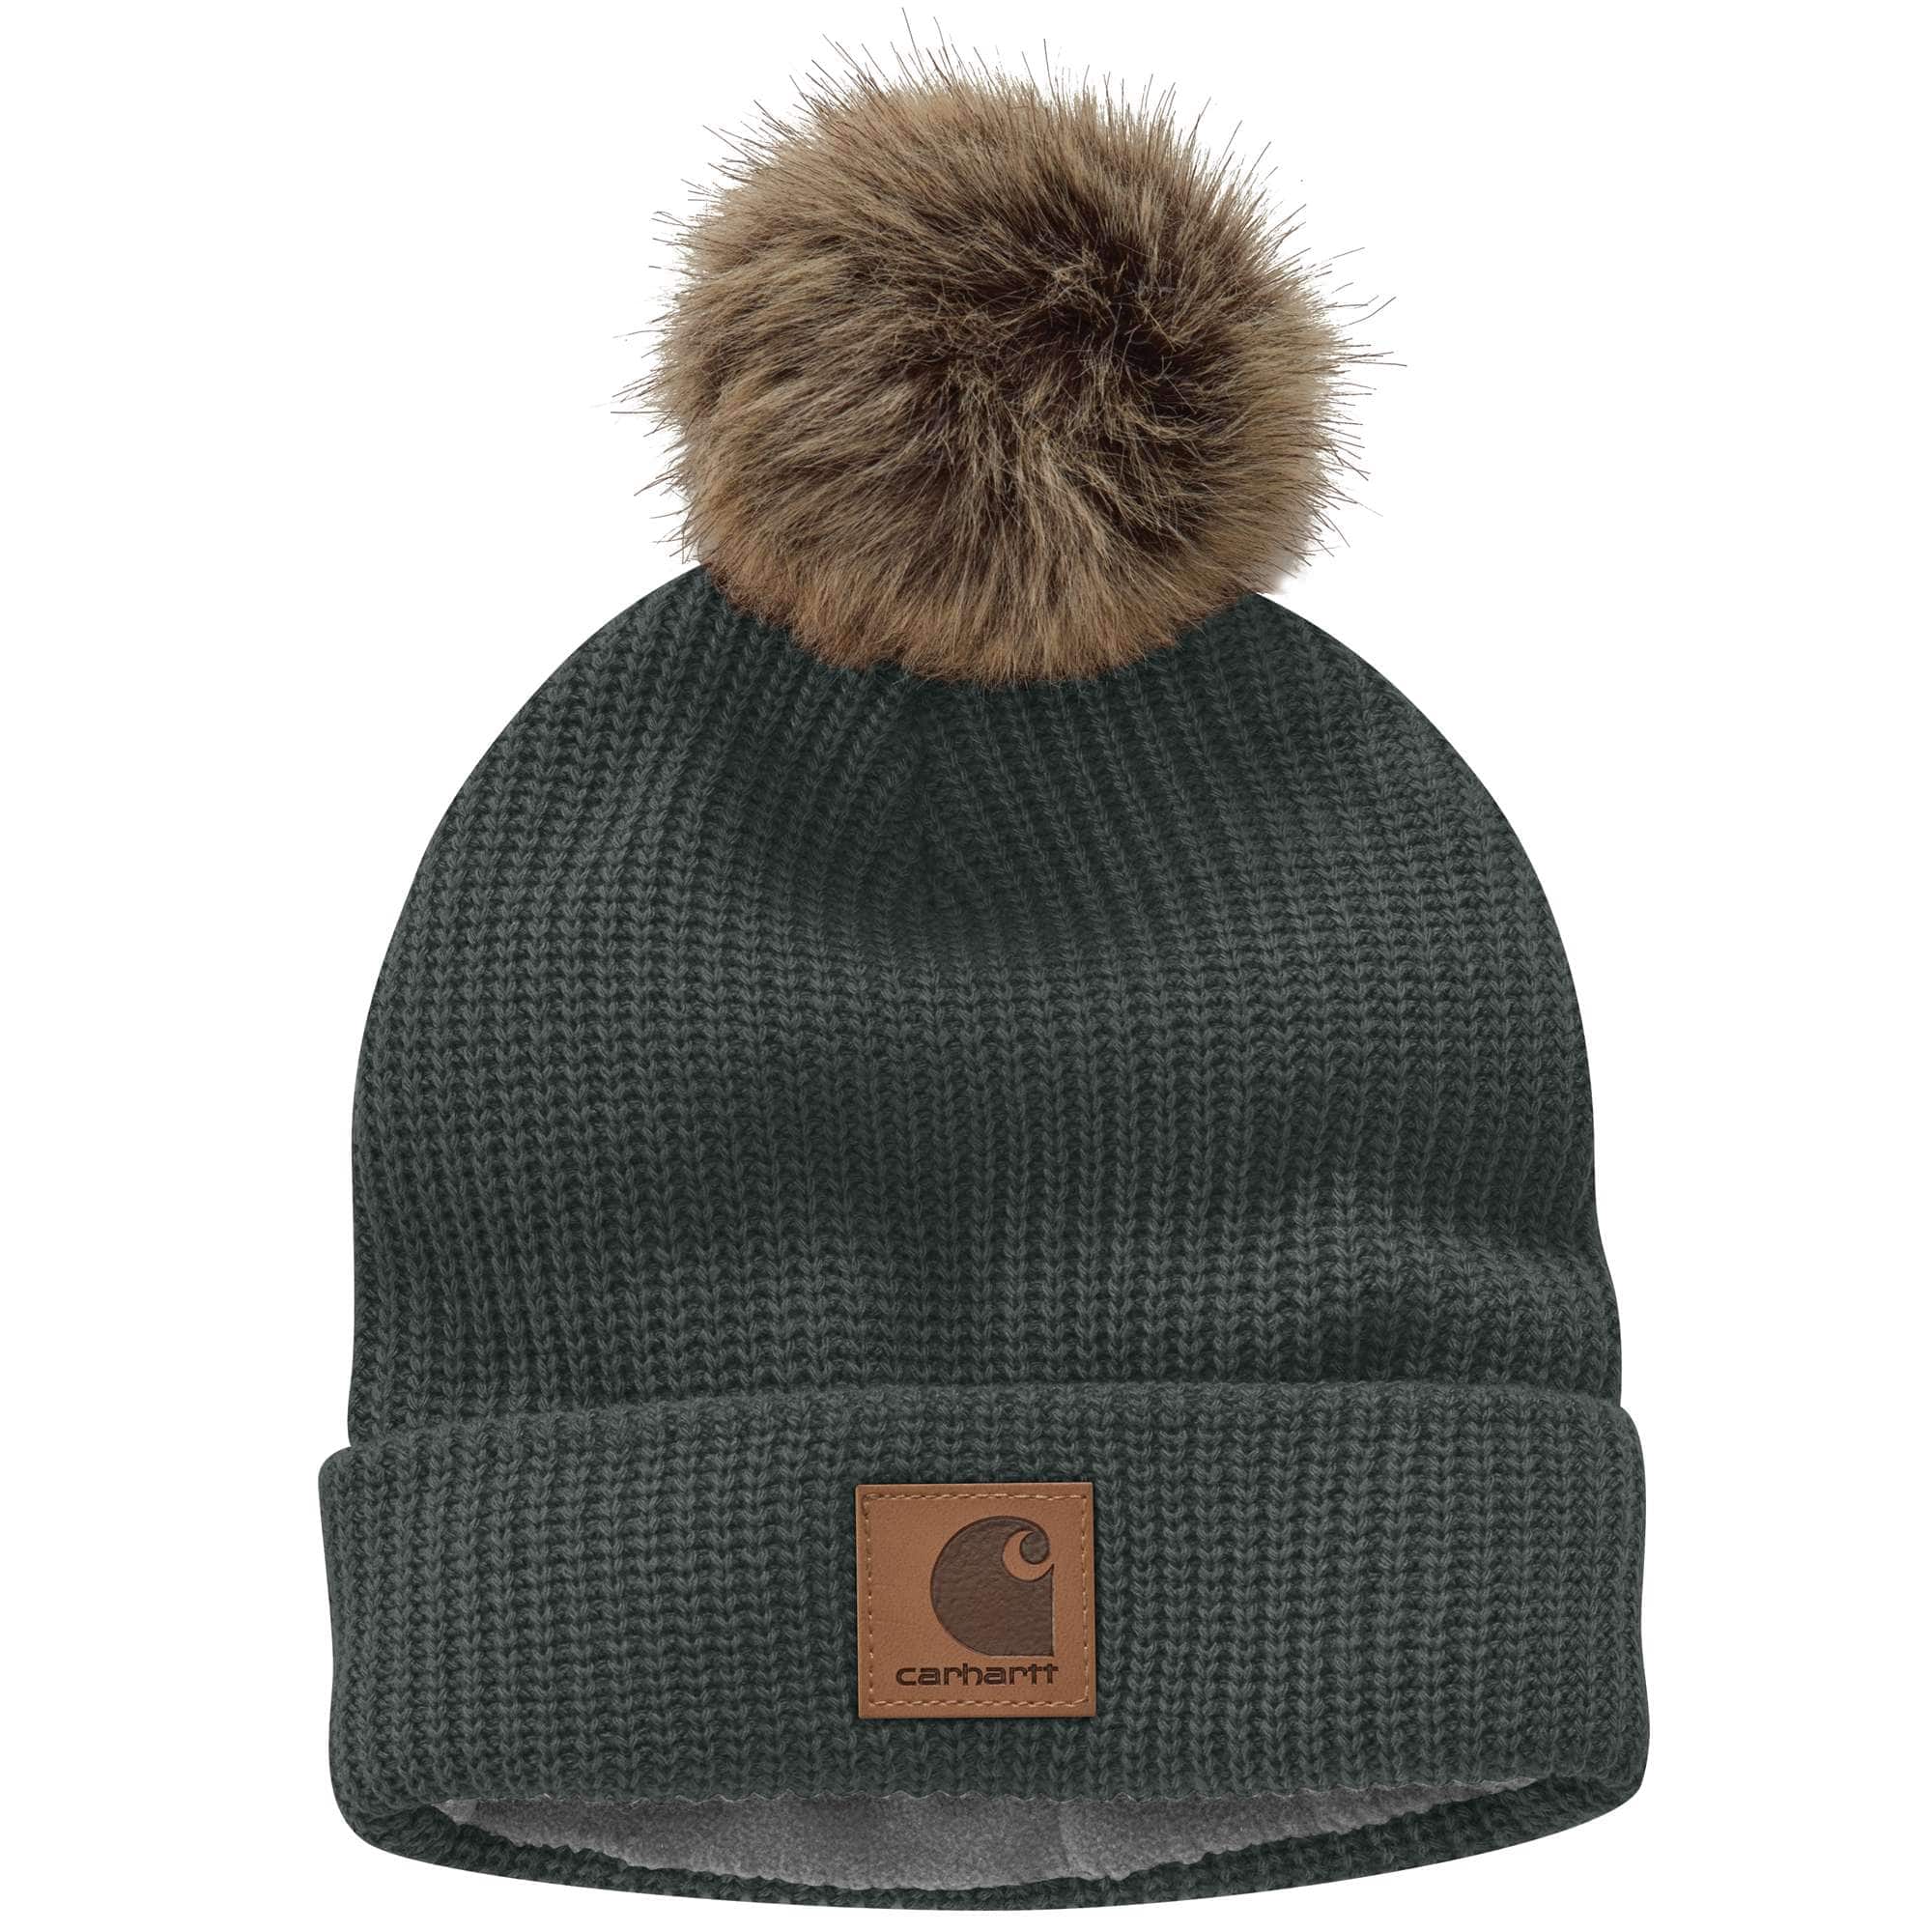 Carhartt Womens Gretna Fleece 2 in 1 Hat and Face Mask